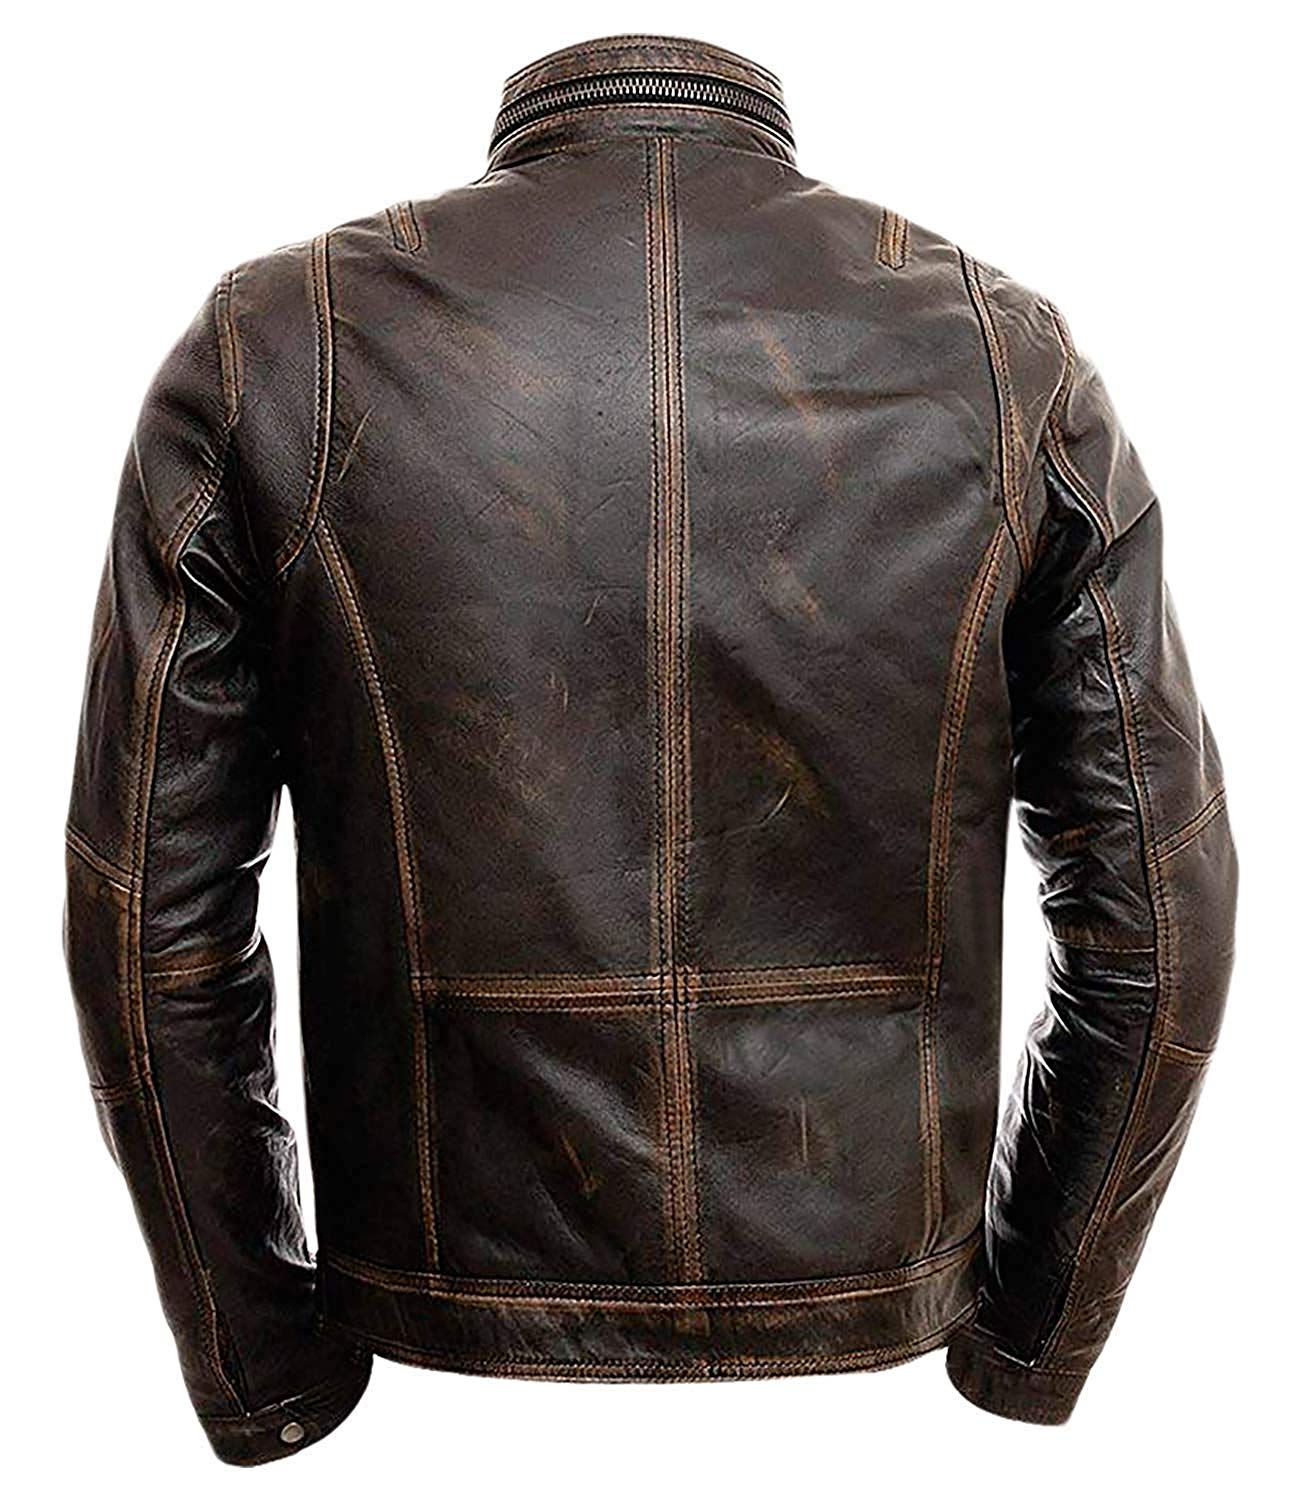 Mens Heavy-Duty Distress Brown Leather Motorcycle Cafe Racer Armor Jacket L